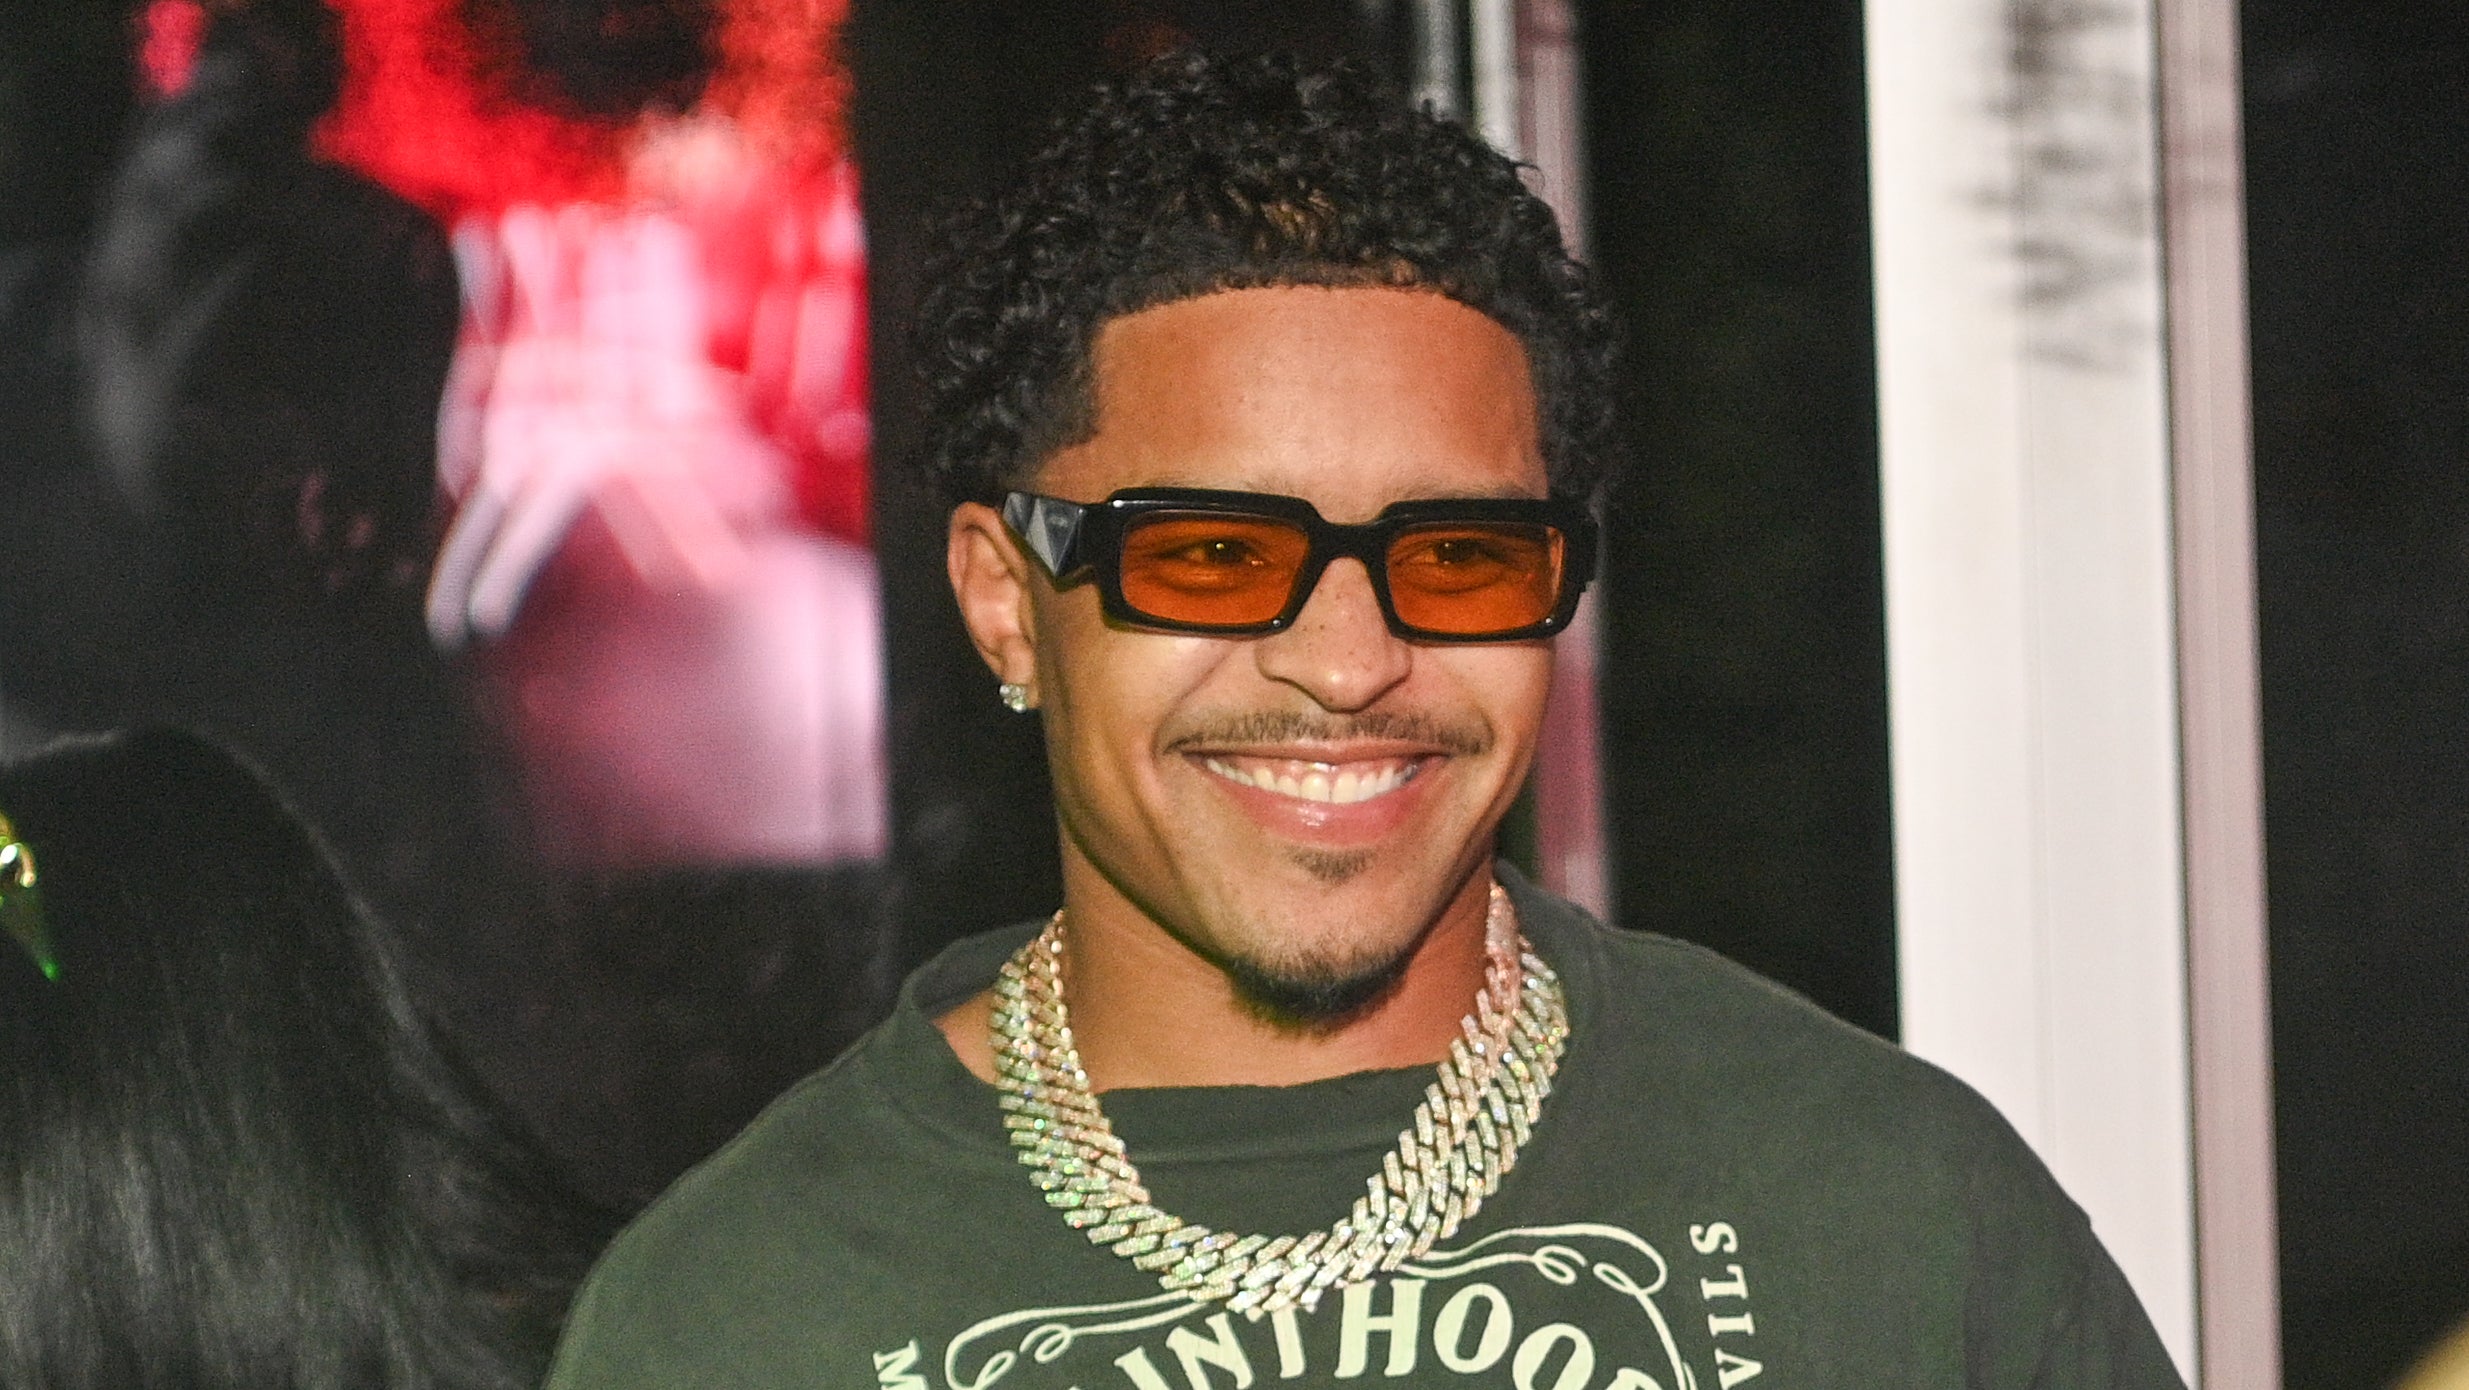 Artist smiling in a graphic tee, layered necklaces, and tinted sunglasses at a music event